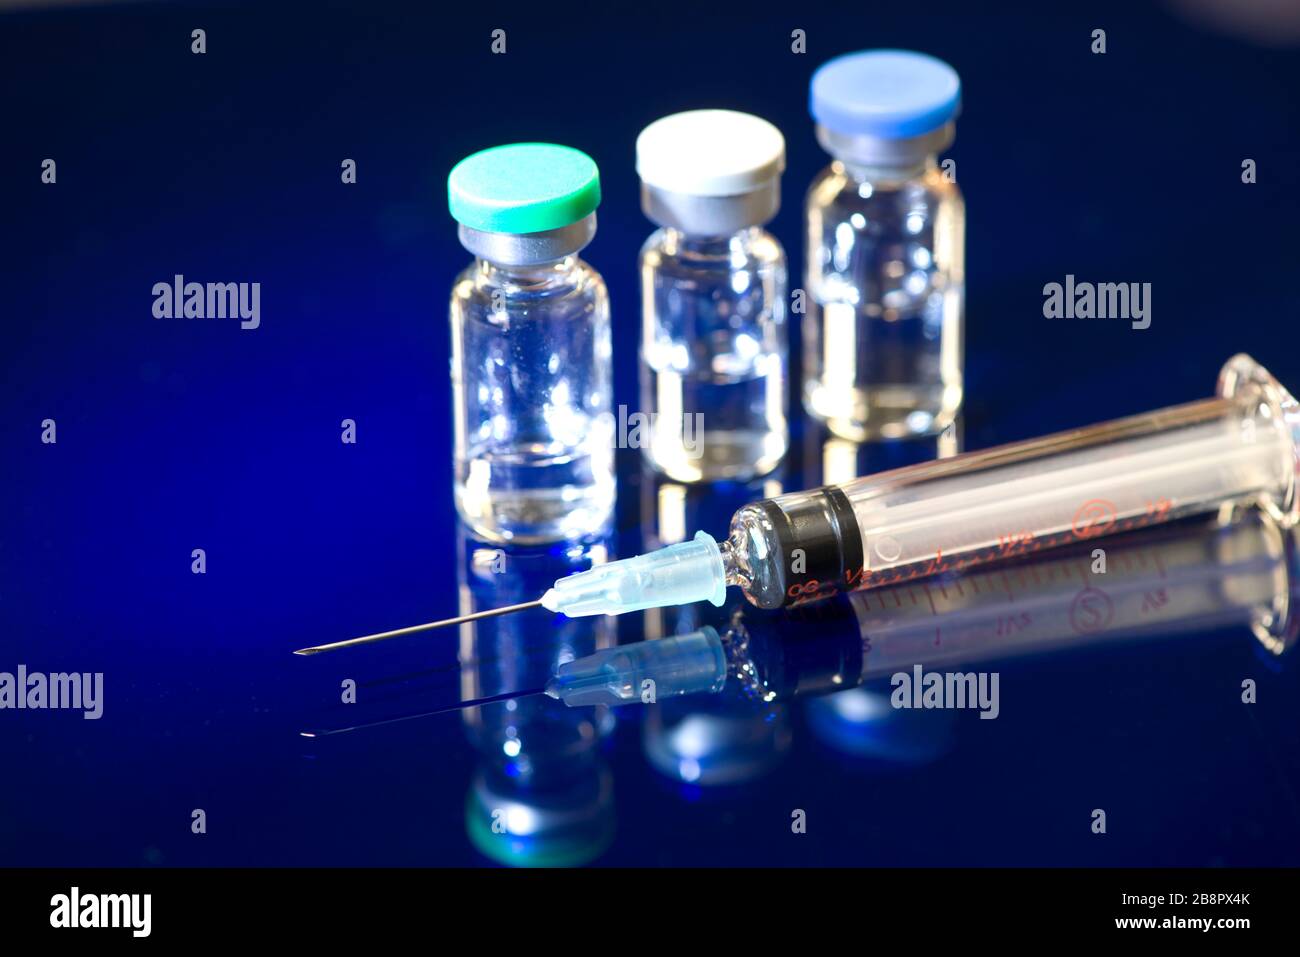 Syringe with three 5ml glass medication vials on blue reflective surface. Stock Photo